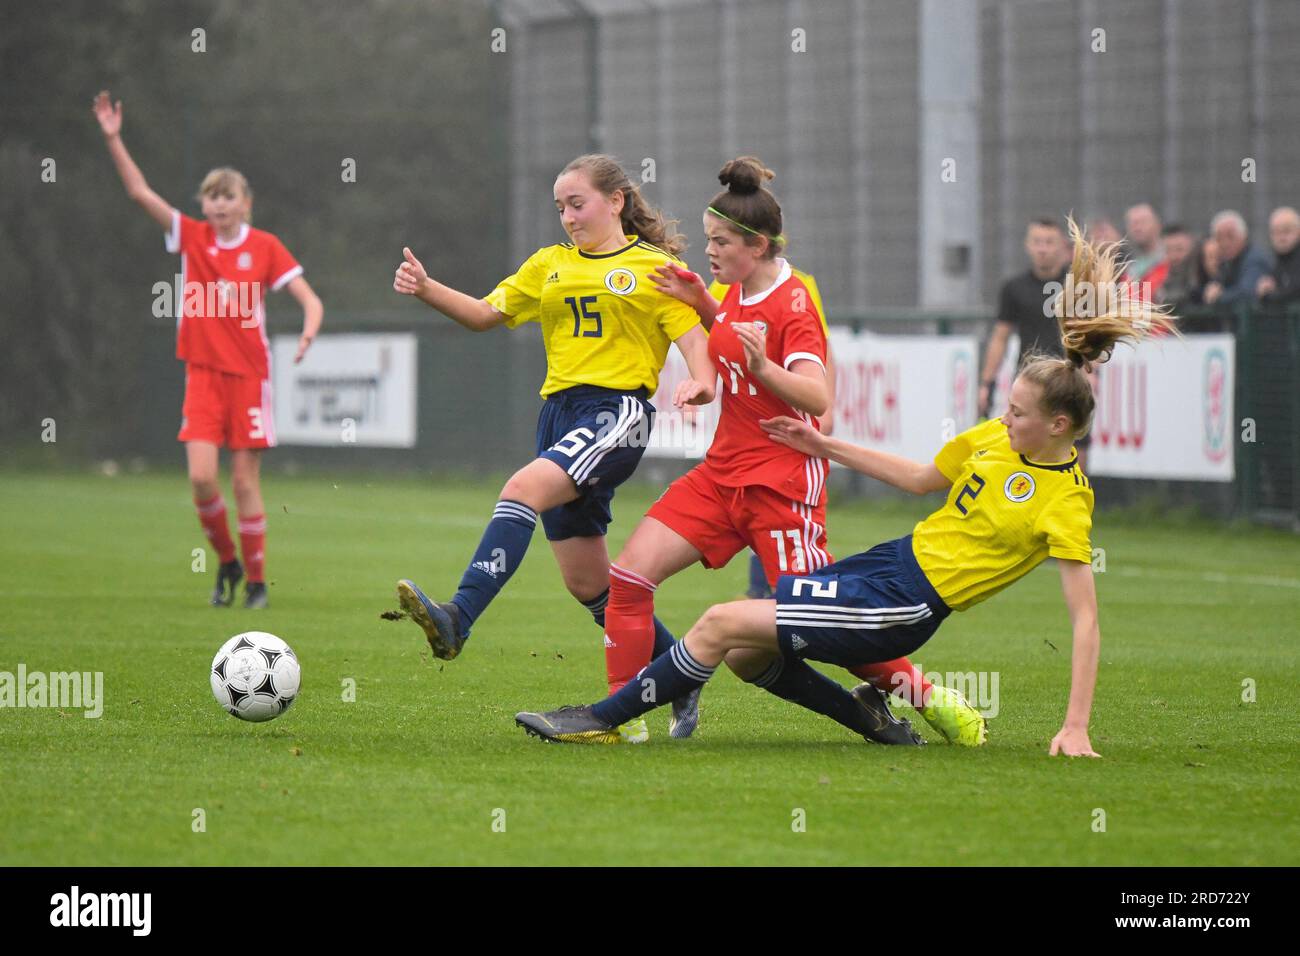 Newport, Wales. 23 October 2019. Niamh Duggan of Wales is tackled by Georgia Gray of Scotland and Georgie Robb of Scotland during the Under 15 Girls Friendly International match between Wales and Scotland at Dragon Park in Newport, Wales, UK on 23 October 2019. Credit: Duncan Thomas/Majestic Media. Stock Photo